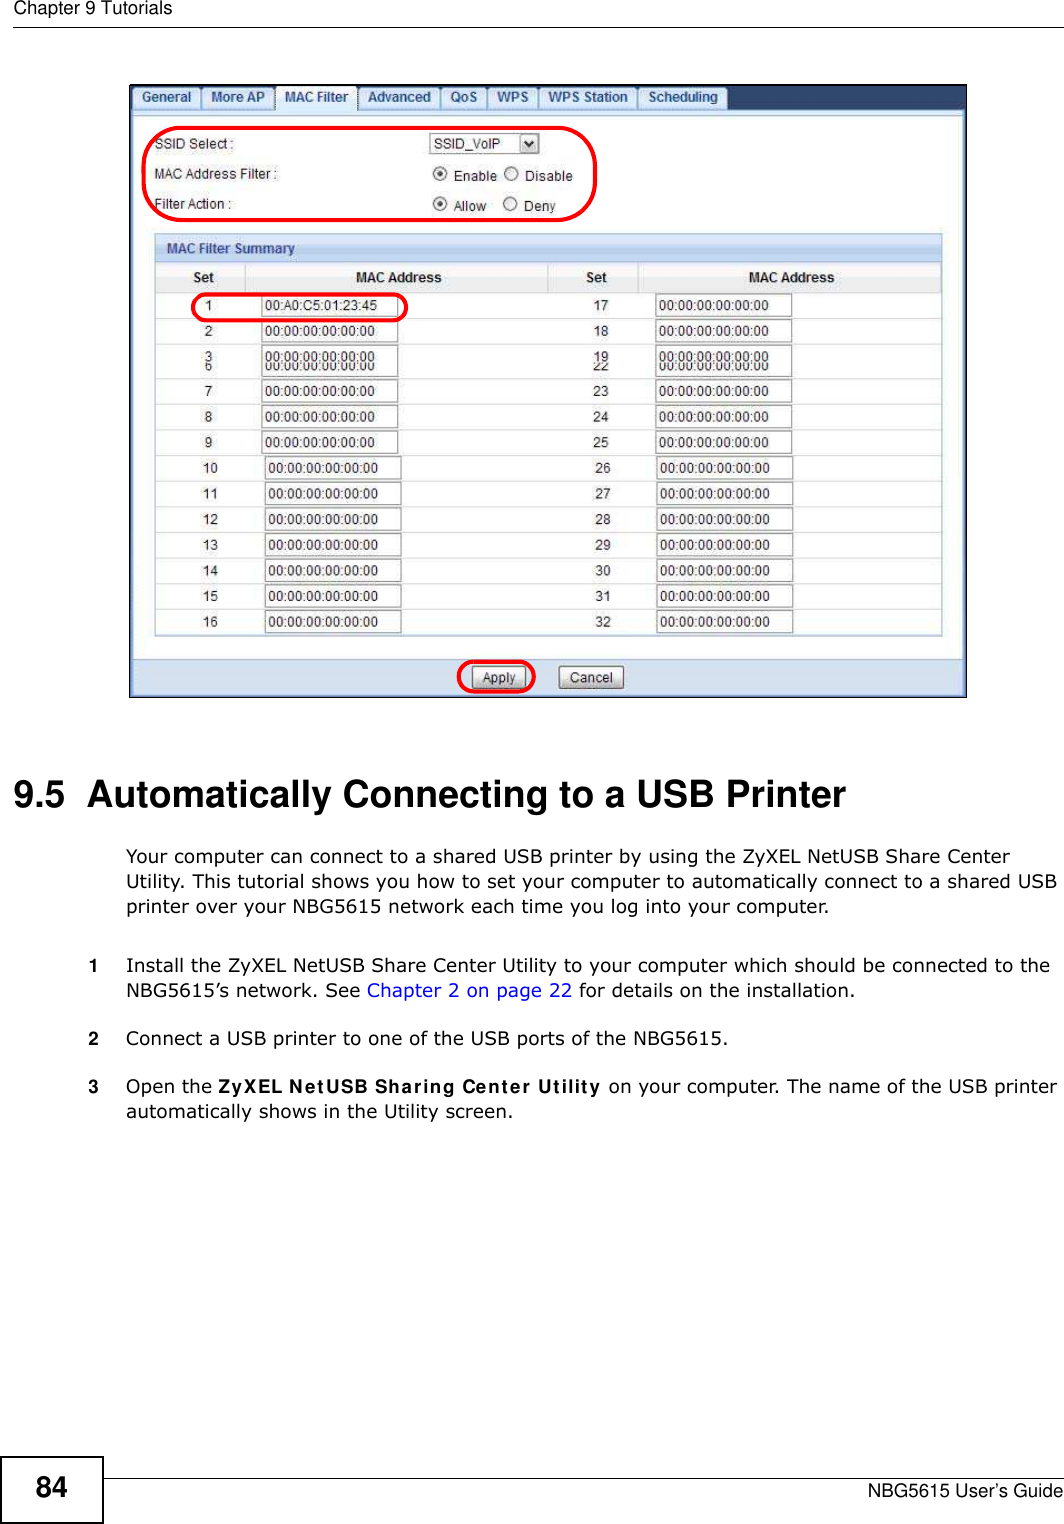 Chapter 9 TutorialsNBG5615 User’s Guide849.5  Automatically Connecting to a USB PrinterYour computer can connect to a shared USB printer by using the ZyXEL NetUSB Share Center Utility. This tutorial shows you how to set your computer to automatically connect to a shared USB printer over your NBG5615 network each time you log into your computer. 1Install the ZyXEL NetUSB Share Center Utility to your computer which should be connected to the NBG5615’s network. See Chapter 2 on page 22 for details on the installation.2Connect a USB printer to one of the USB ports of the NBG5615. 3Open the ZyXEL NetUSB Sharing Center Utility on your computer. The name of the USB printer automatically shows in the Utility screen. 